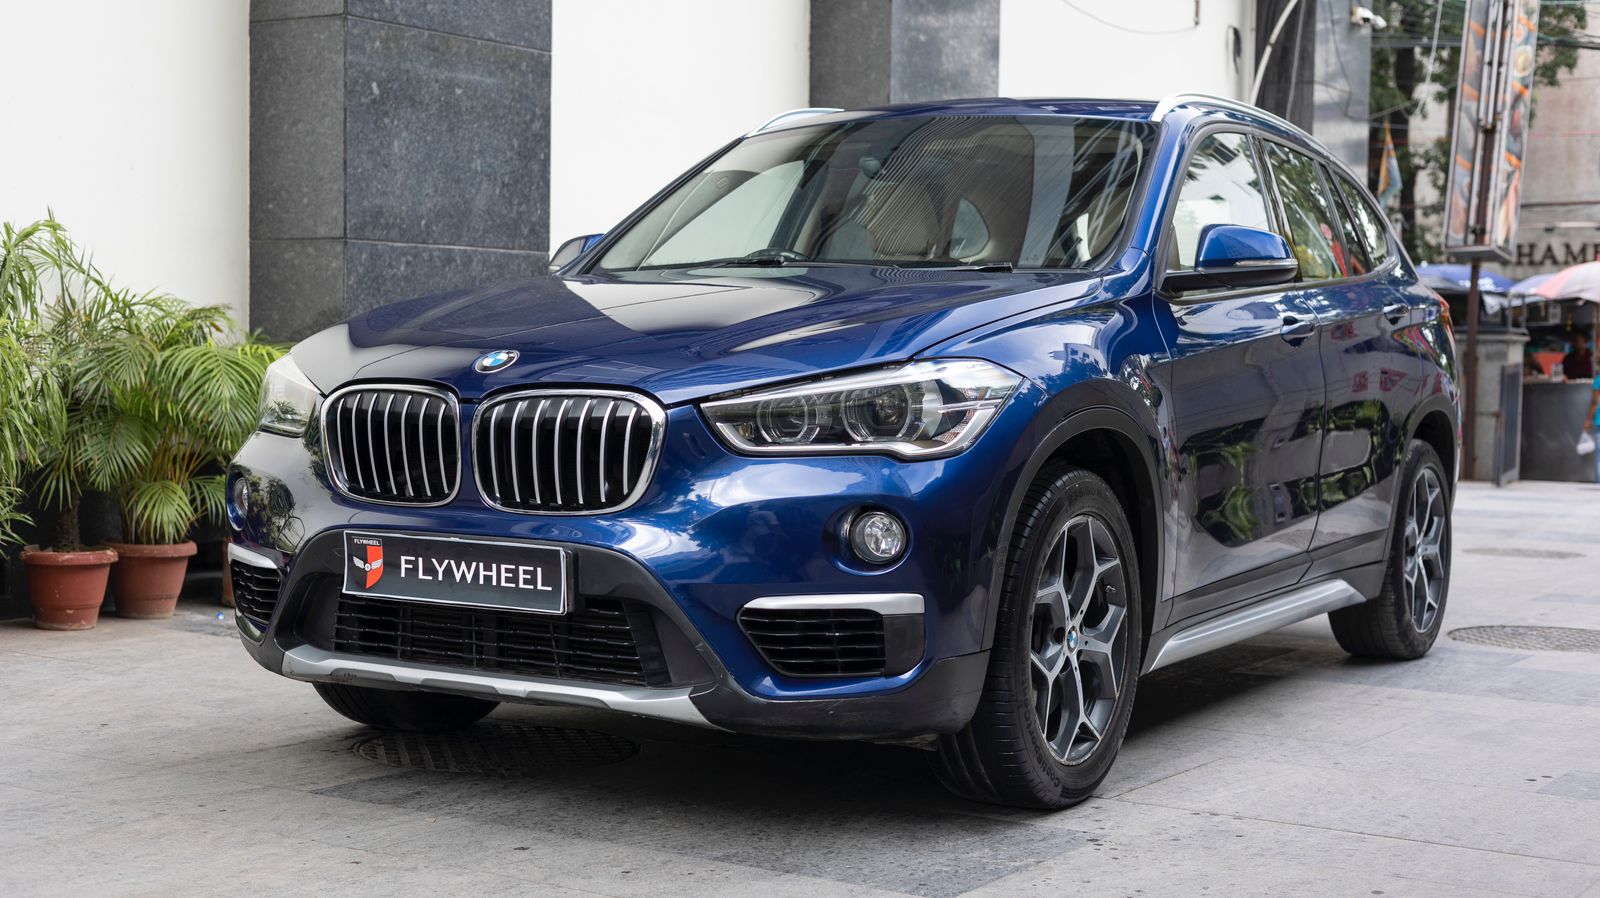 BMW X1 SDRIVE 20D 2017: A Fusion of Luxury and Performance Like Never Before